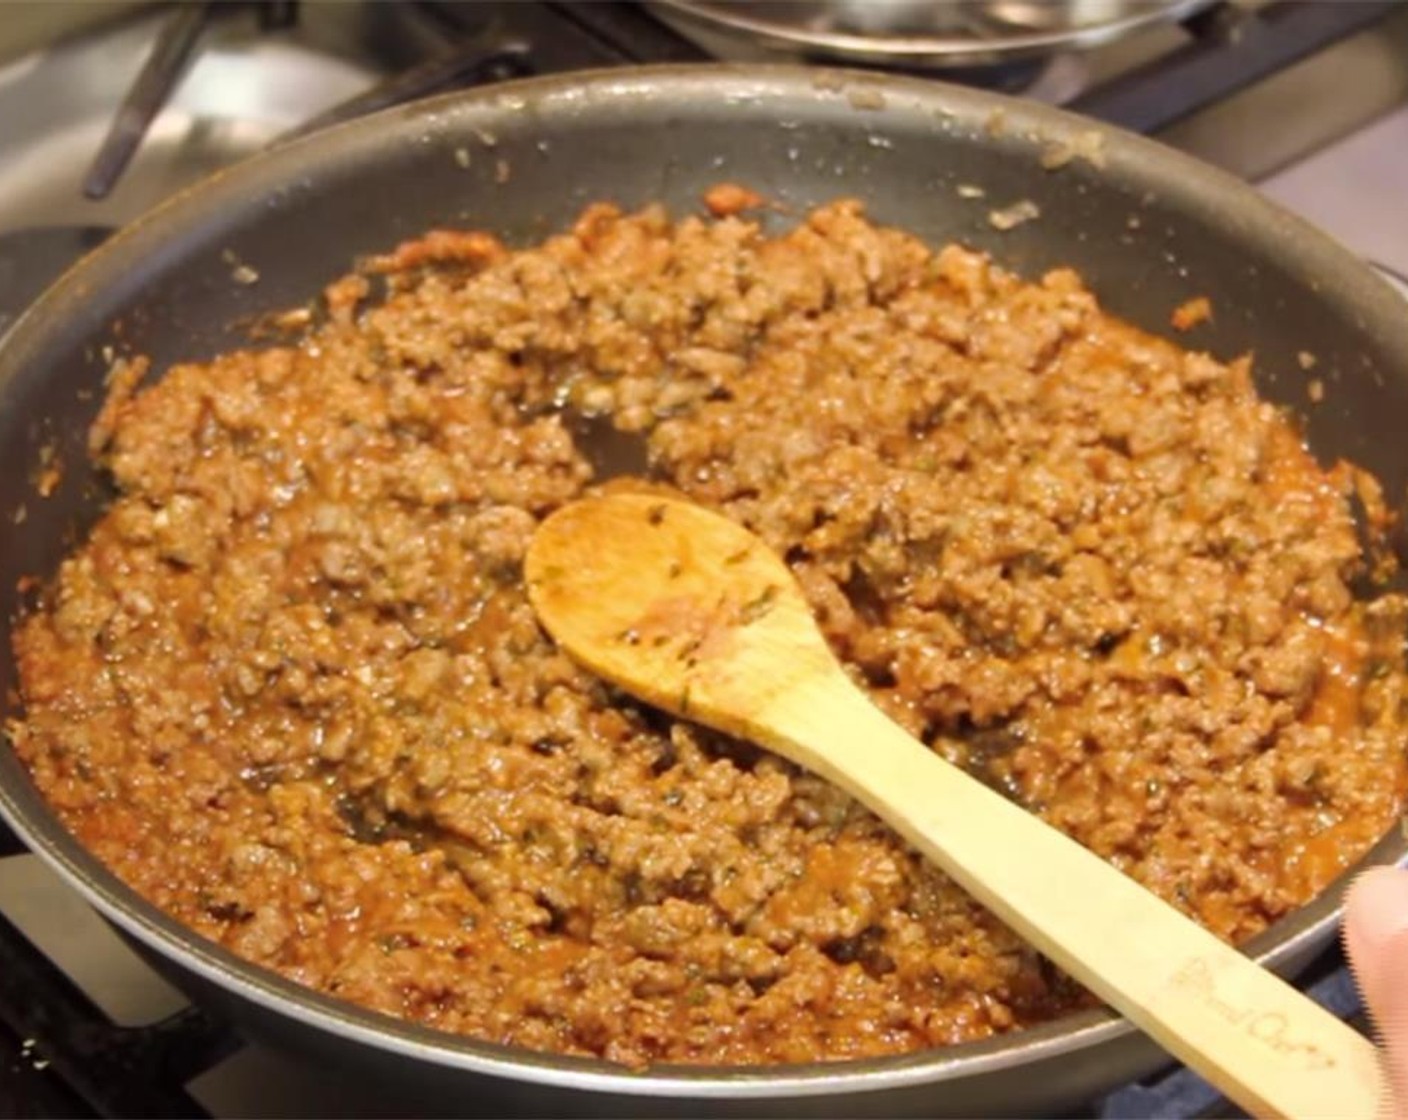 step 6 Your Mexican ground beef is now ready to be used in your favorite Mexican recipes! Enjoy!